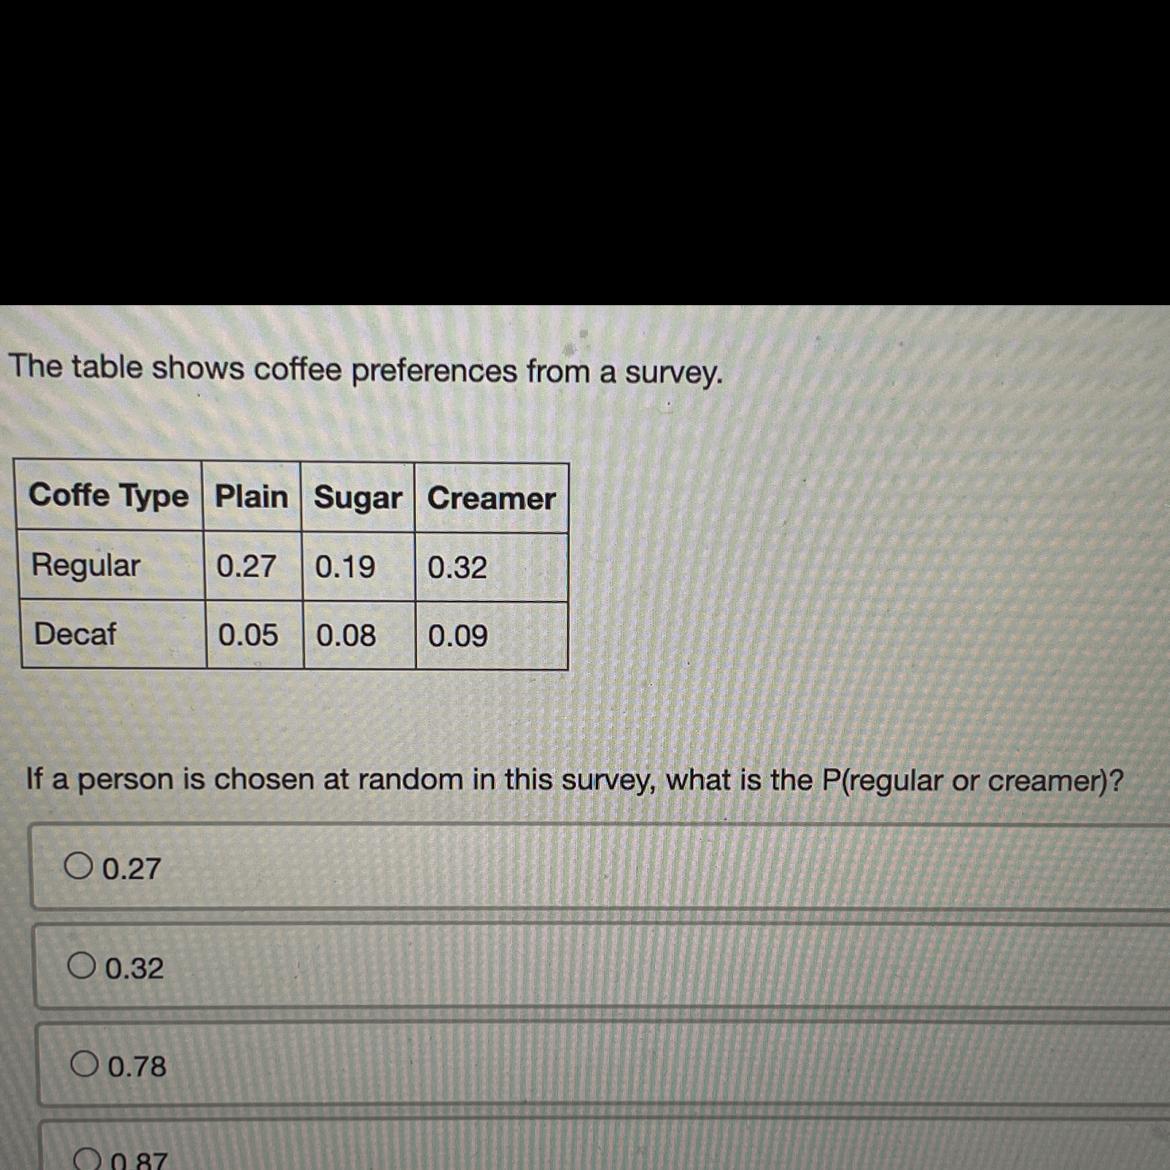 The Table Shows Coffee Preference From A Survey. If A Person Is Chosen At Random In The Survey What Is